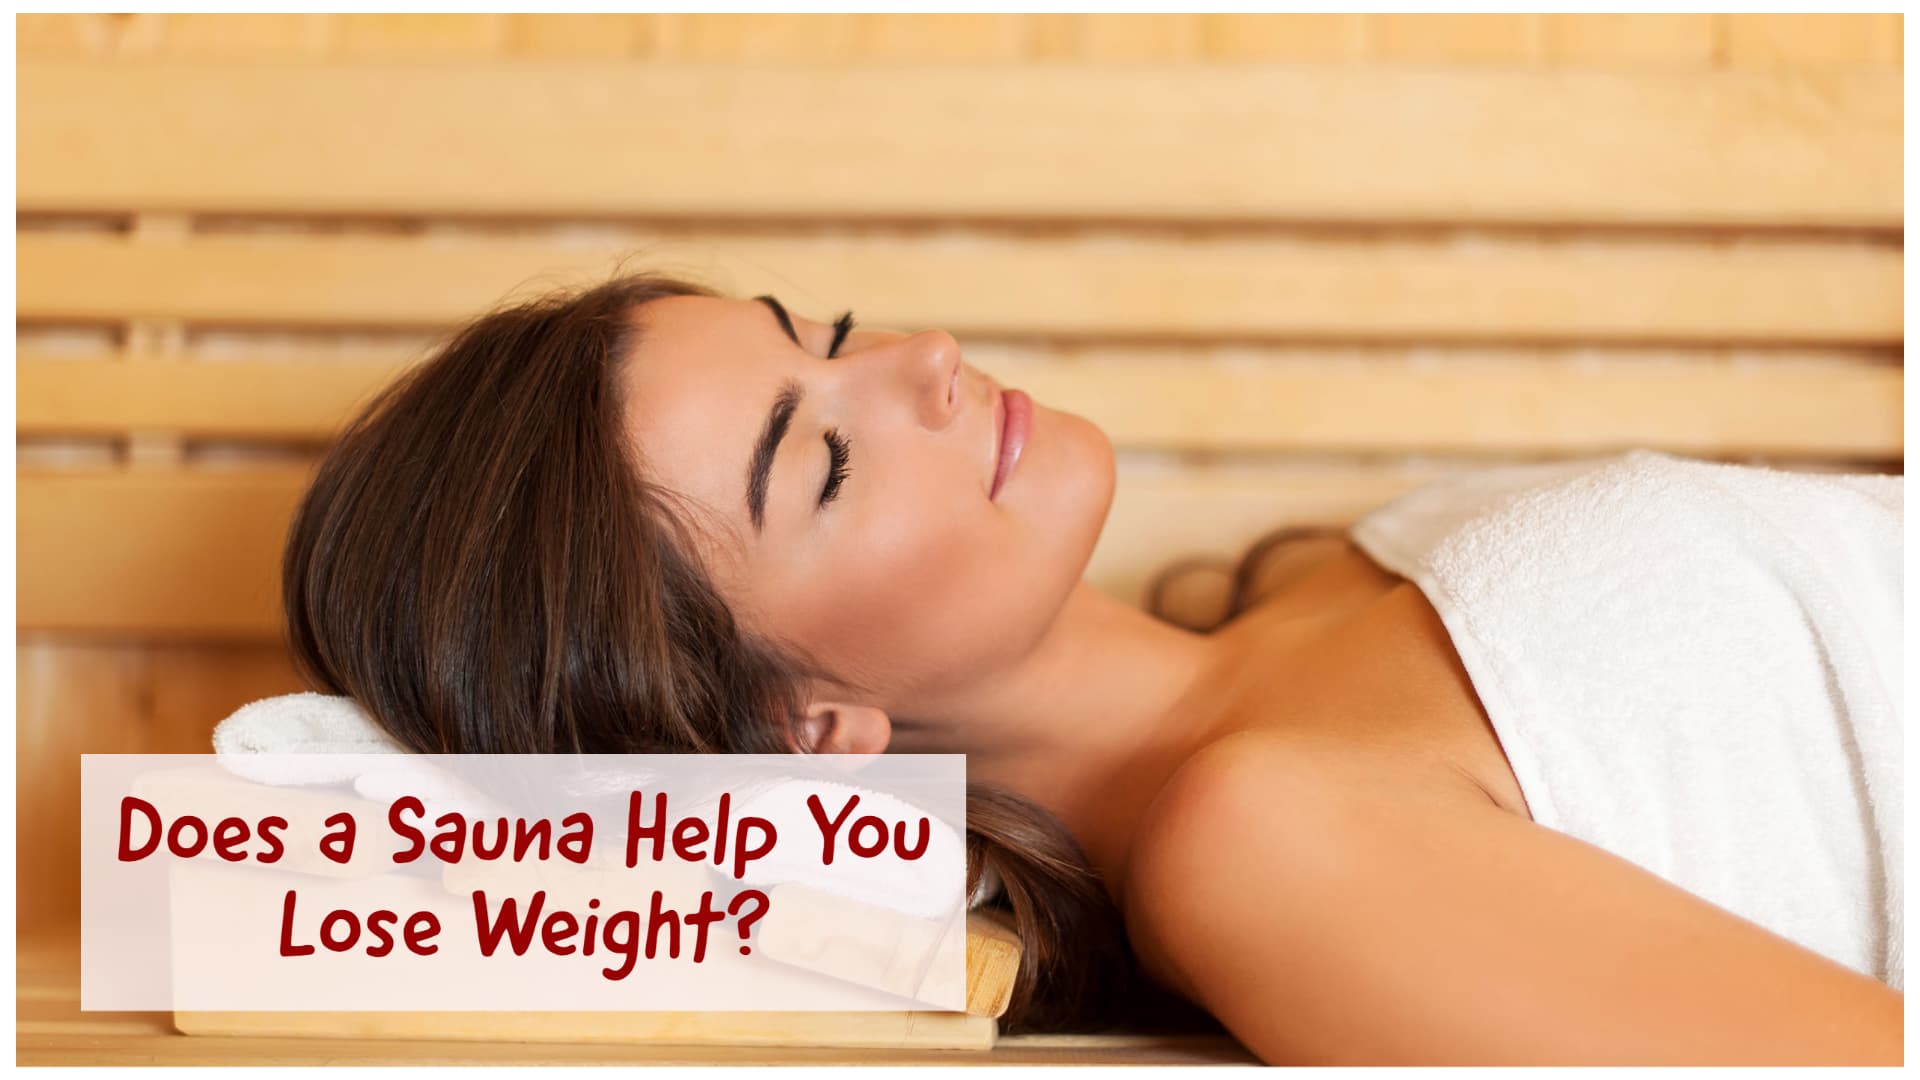 Are you able to lose weight in steam rooms, Does a Sauna Help You Lose Weight, Does sauna burn fat, Dried Sauna, How different types of saunas work, how long should I be in a sauna to lose weight, How long should you sit in a dry sauna, Is sauna good for skin, Saunas and heart health, Should I shower after sauna, Should you sauna before or after workout